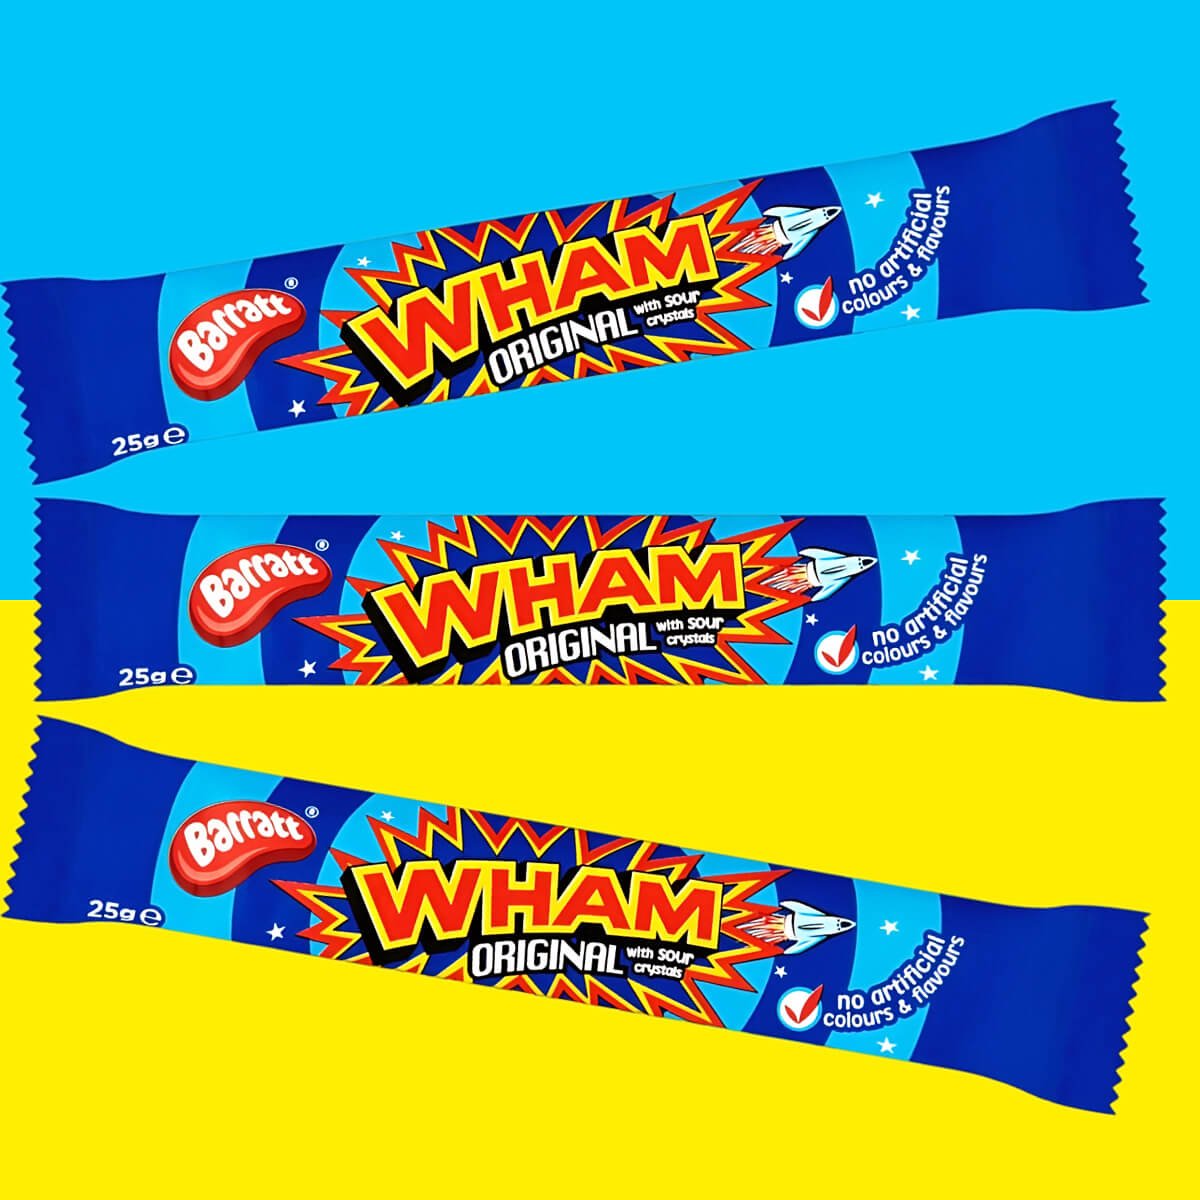 Three Barratt Wham Original bars in their wrappers, with a yellow and blue background